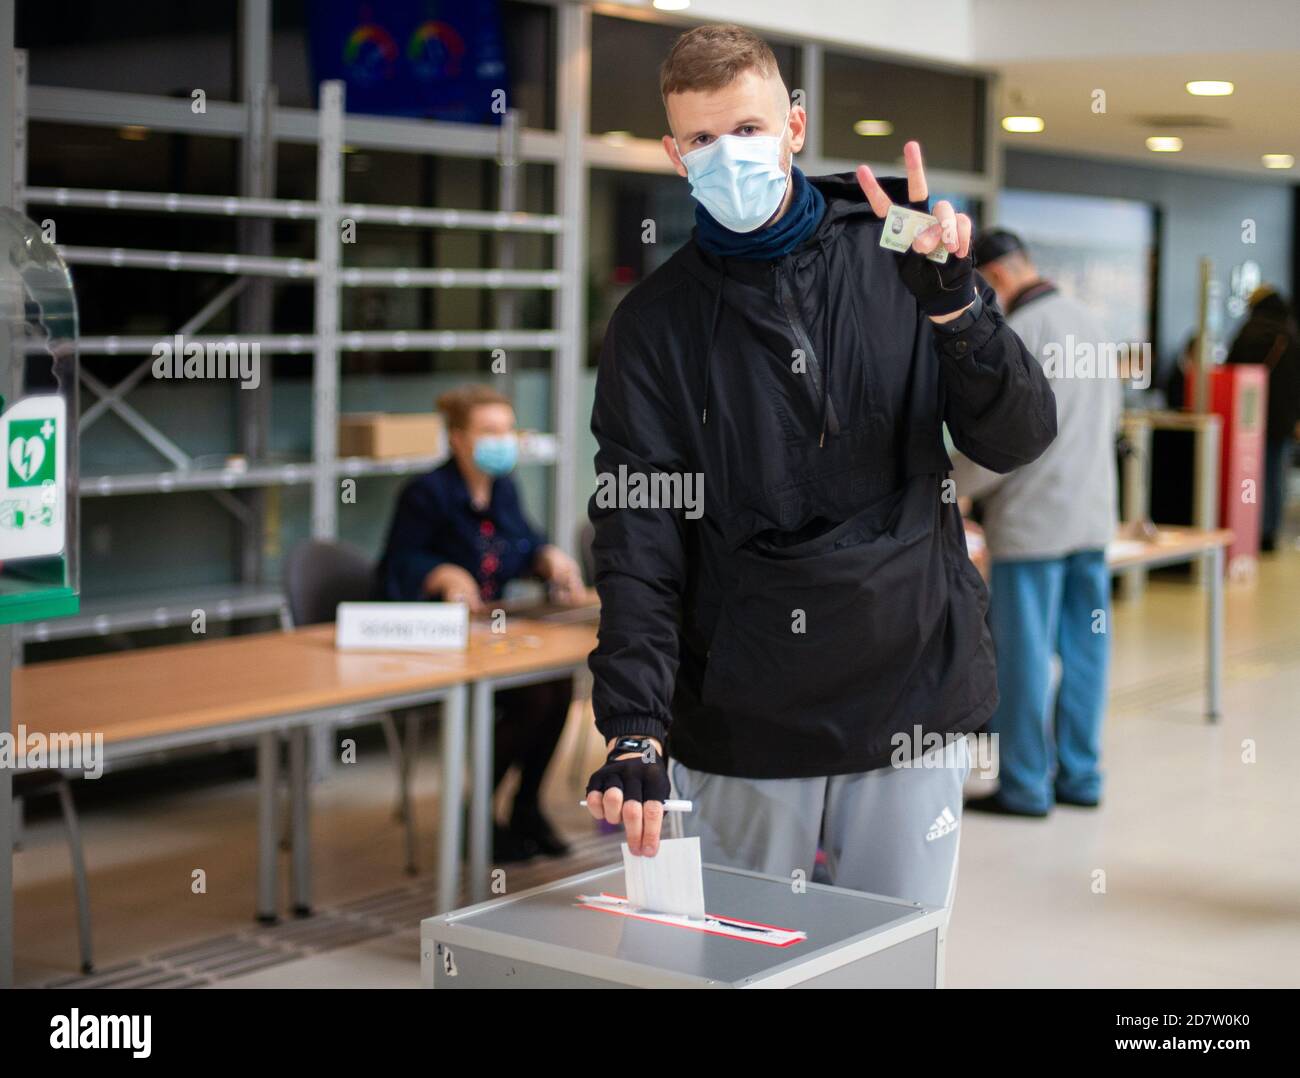 Vilnius, Lithuania. 25th Oct, 2020. A voter casts his ballot in a polling station for the parliament elections in Vilnius, Lithuania, Oct. 25, 2020. Lithuania held the second round of parliamentary elections Sunday to elect 68 members of the 141-seat unicameral parliament, or the Seimas, whose 73 other members have been elected in the first round on Oct. 11. Credit: Alfredas Pliadis/Xinhua/Alamy Live News Stock Photo